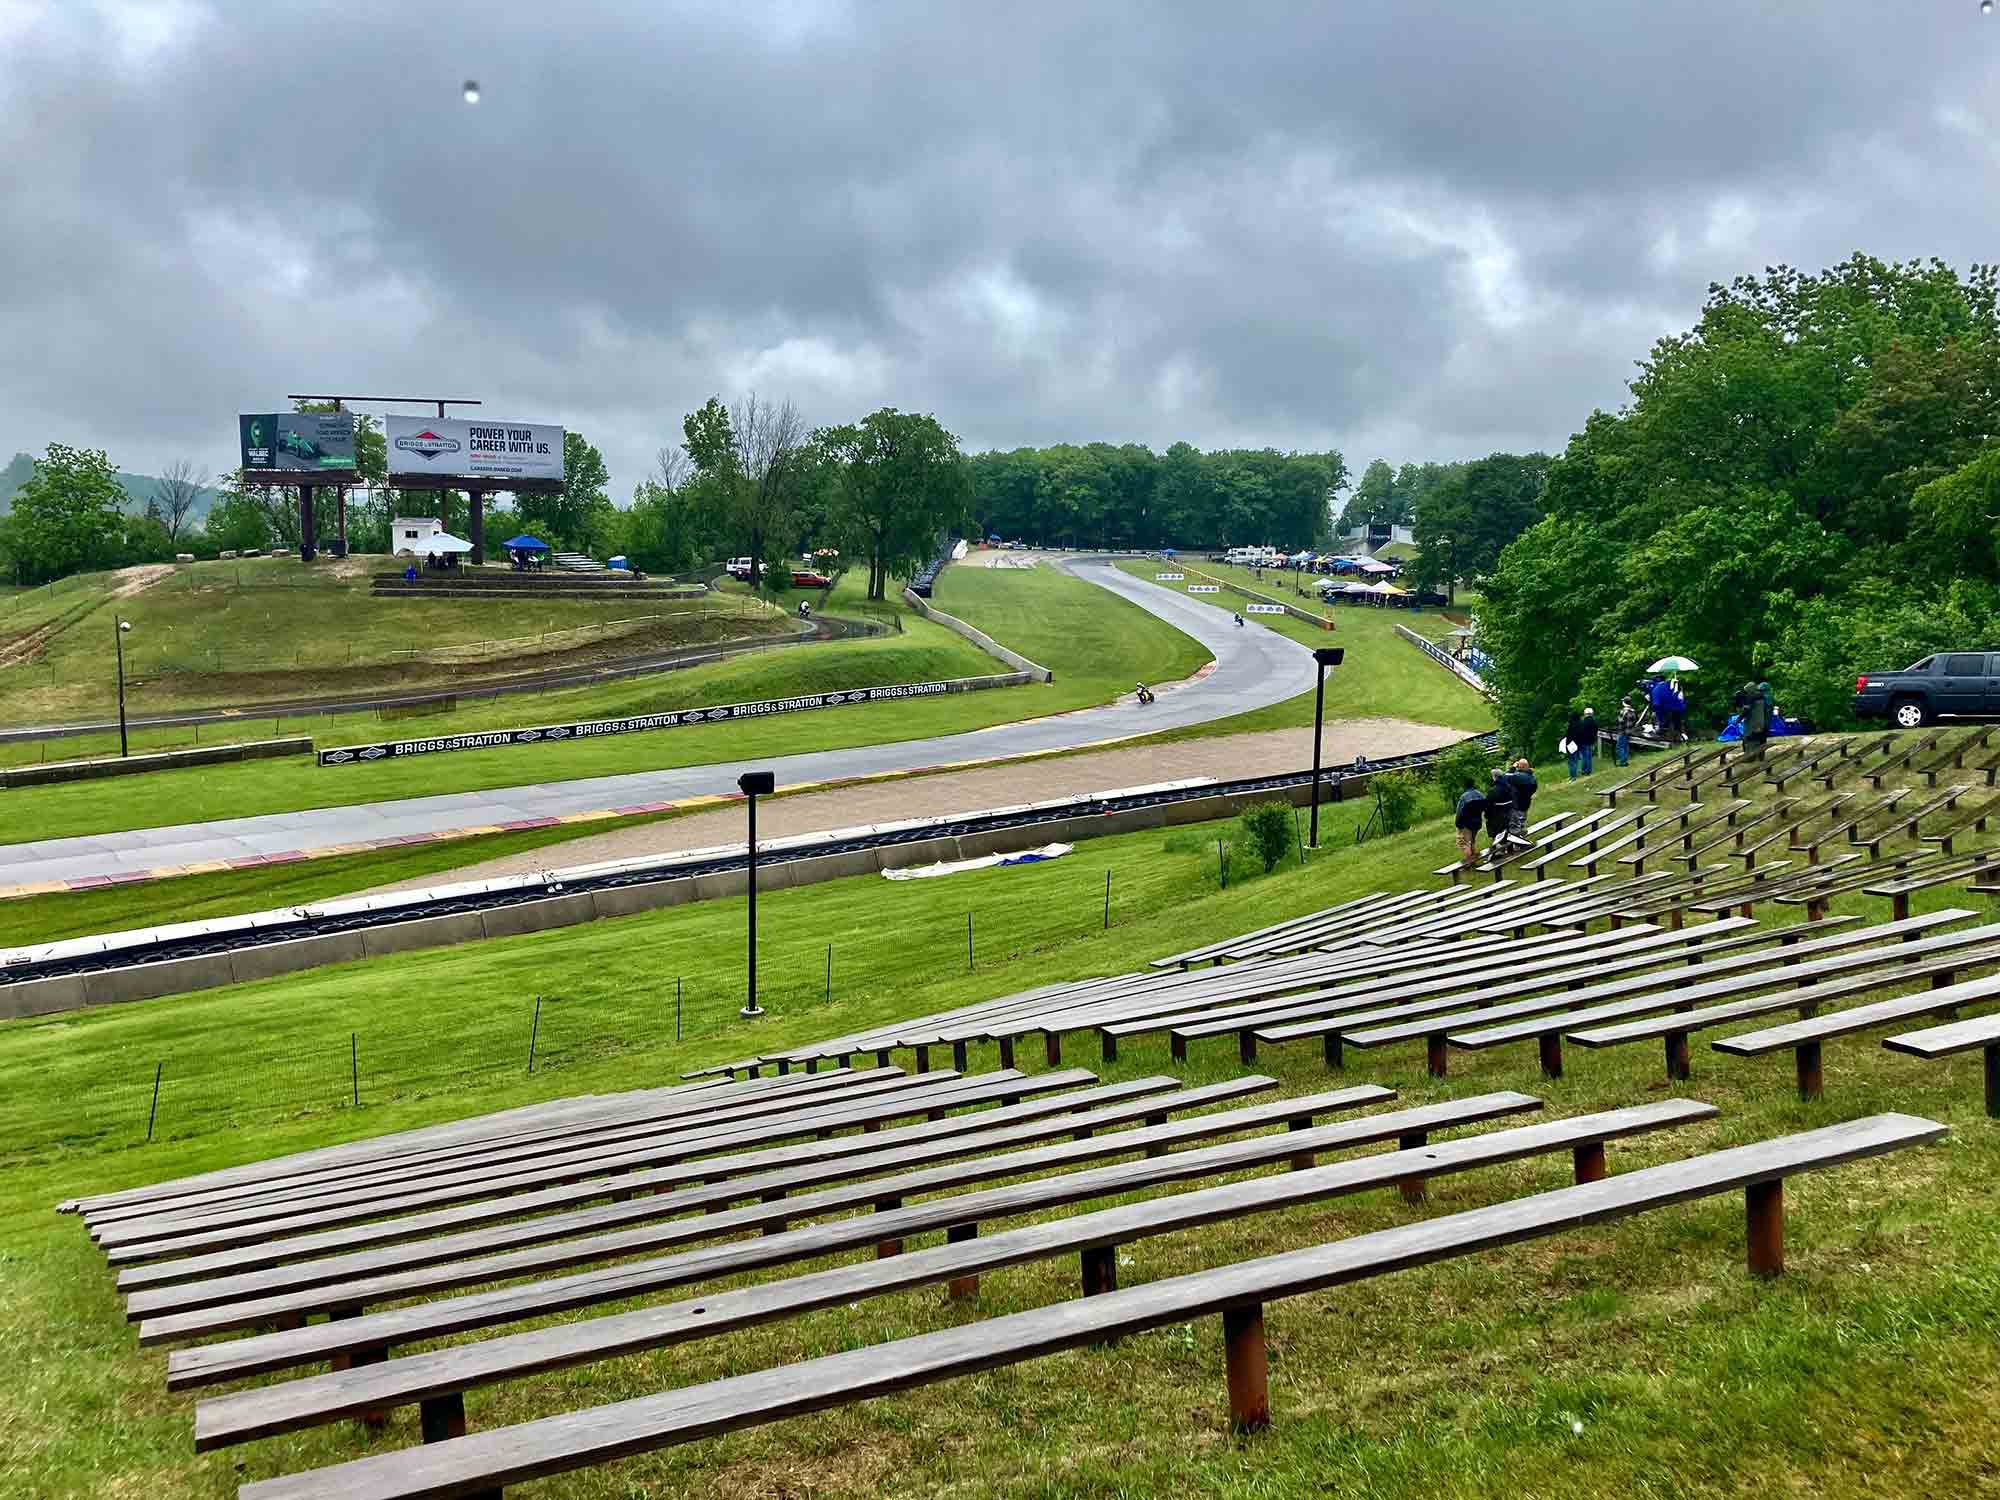 Sunday’s rain thinned the crowd, but the wet race action didn’t disappoint.